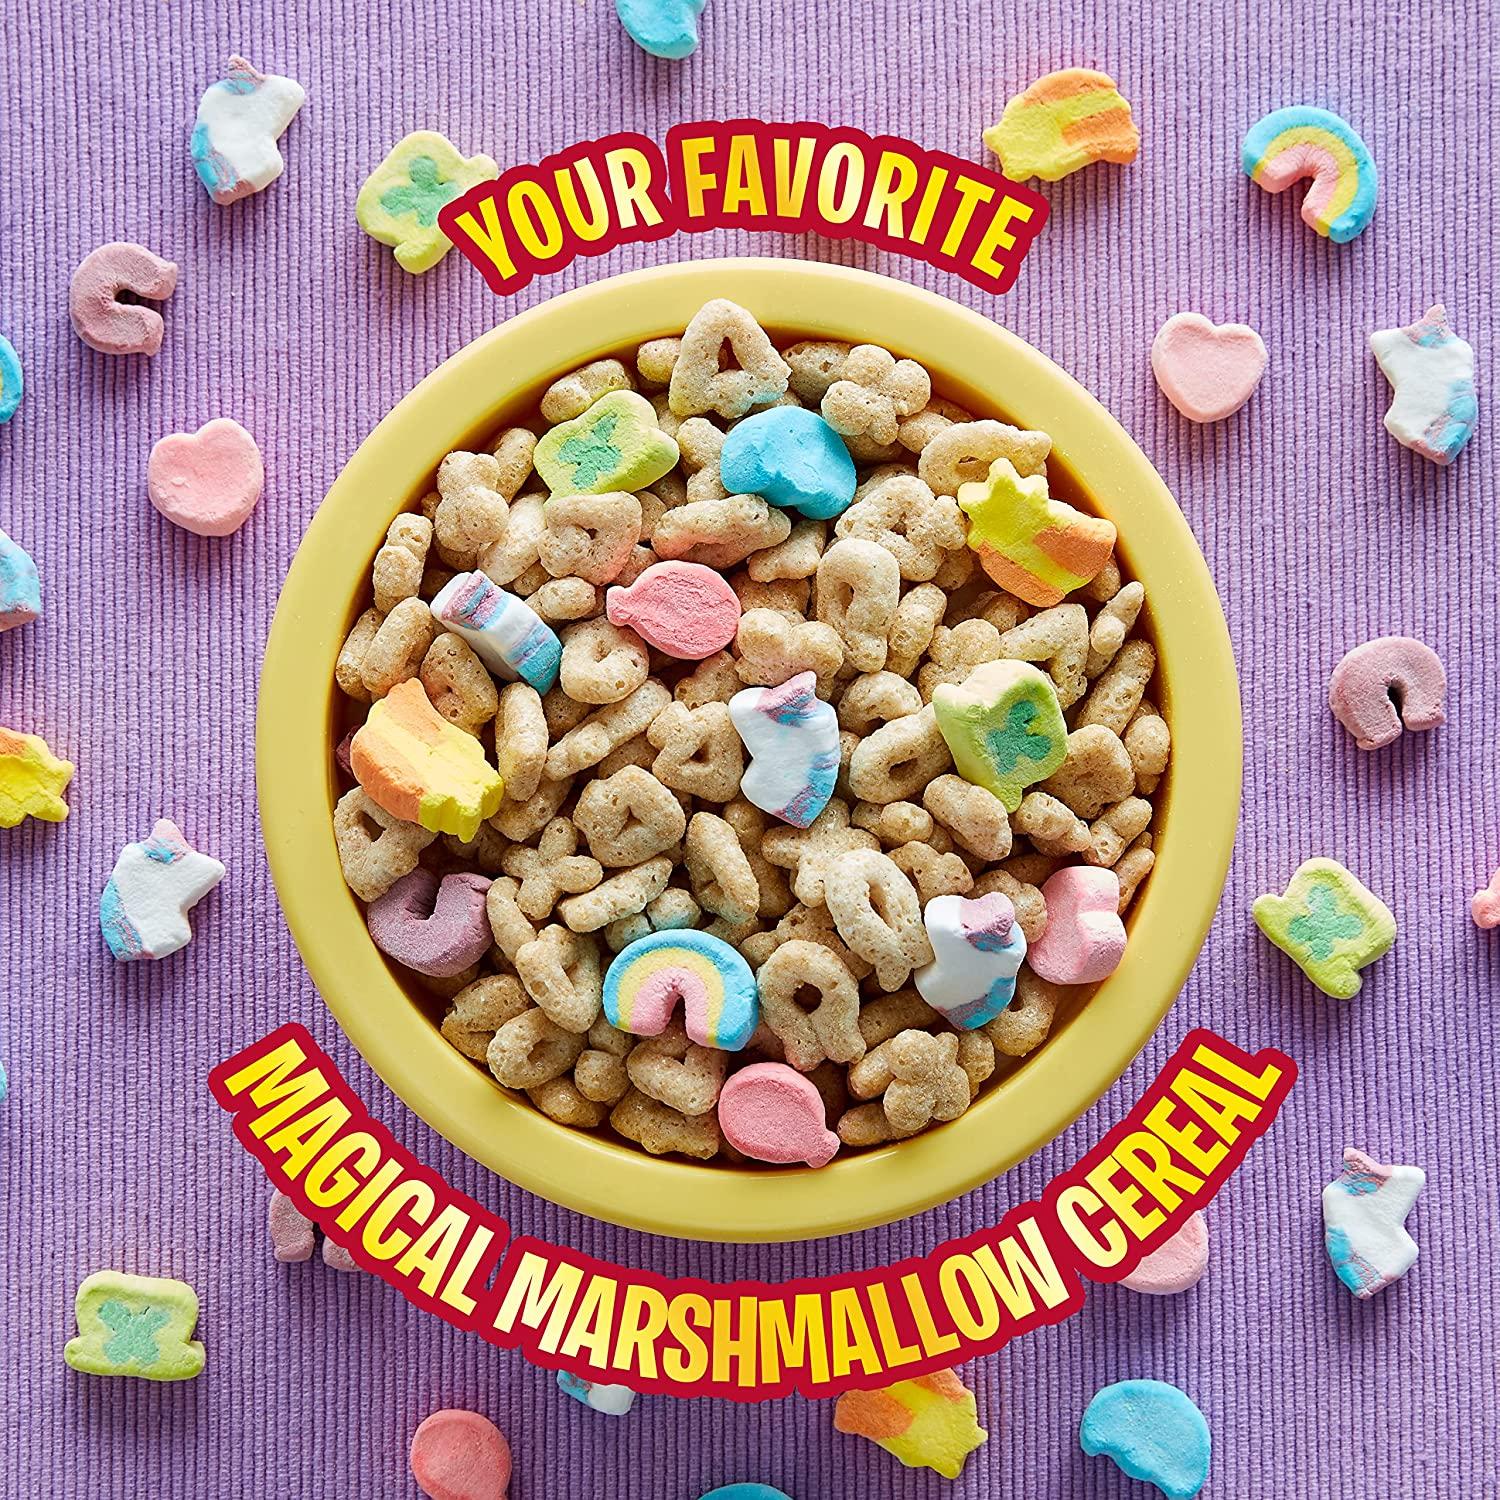 Magical?​ Maybe.​ But Lucky Charms cereal is​ still​ artificially​ flavored